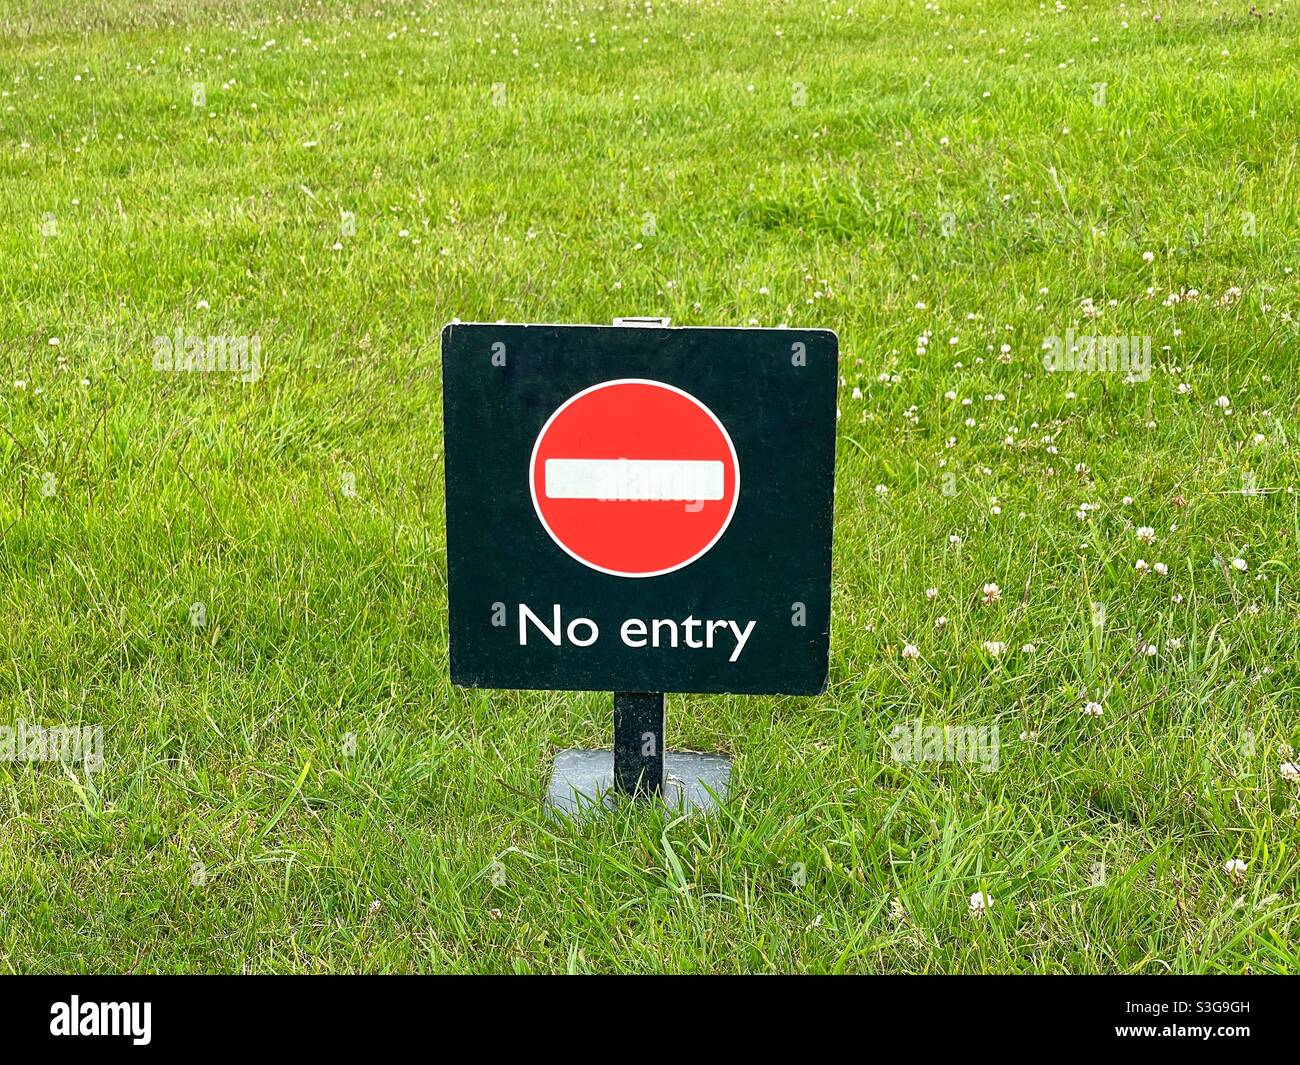 No entry sign on a plain background of green grass Stock Photo